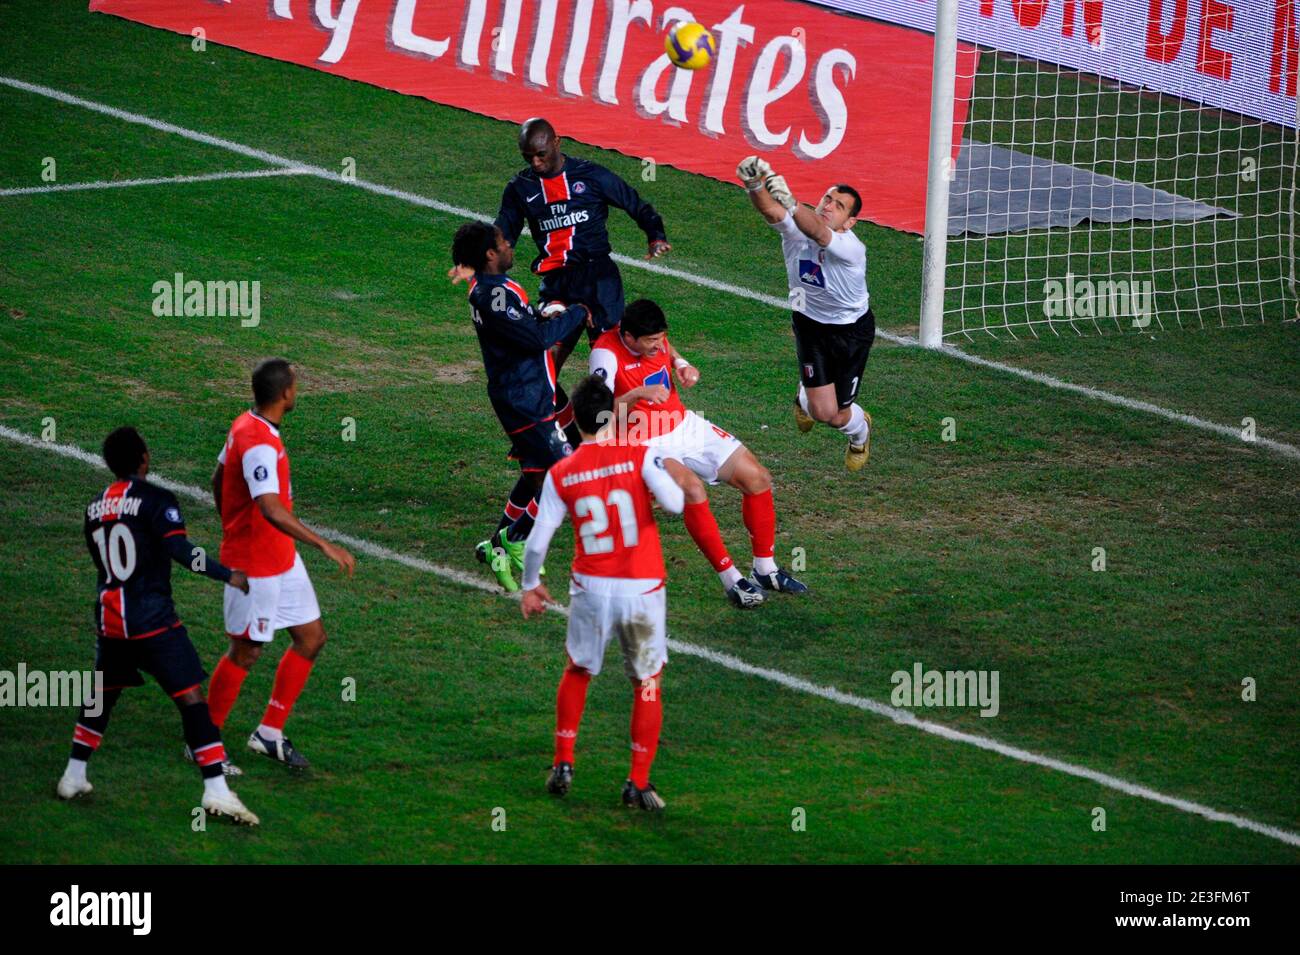 Save by Eduardo Carvalho goalkeeper of Braga during the UEFA Cup 1/8 finals soccer match, PSG vs Braga at the Parc des Princes in Paris, France on March 12, 2009. PSG and Braga draw 0-0. Photo by Henri Szwarc/ABACAPRESS.COM Stock Photo